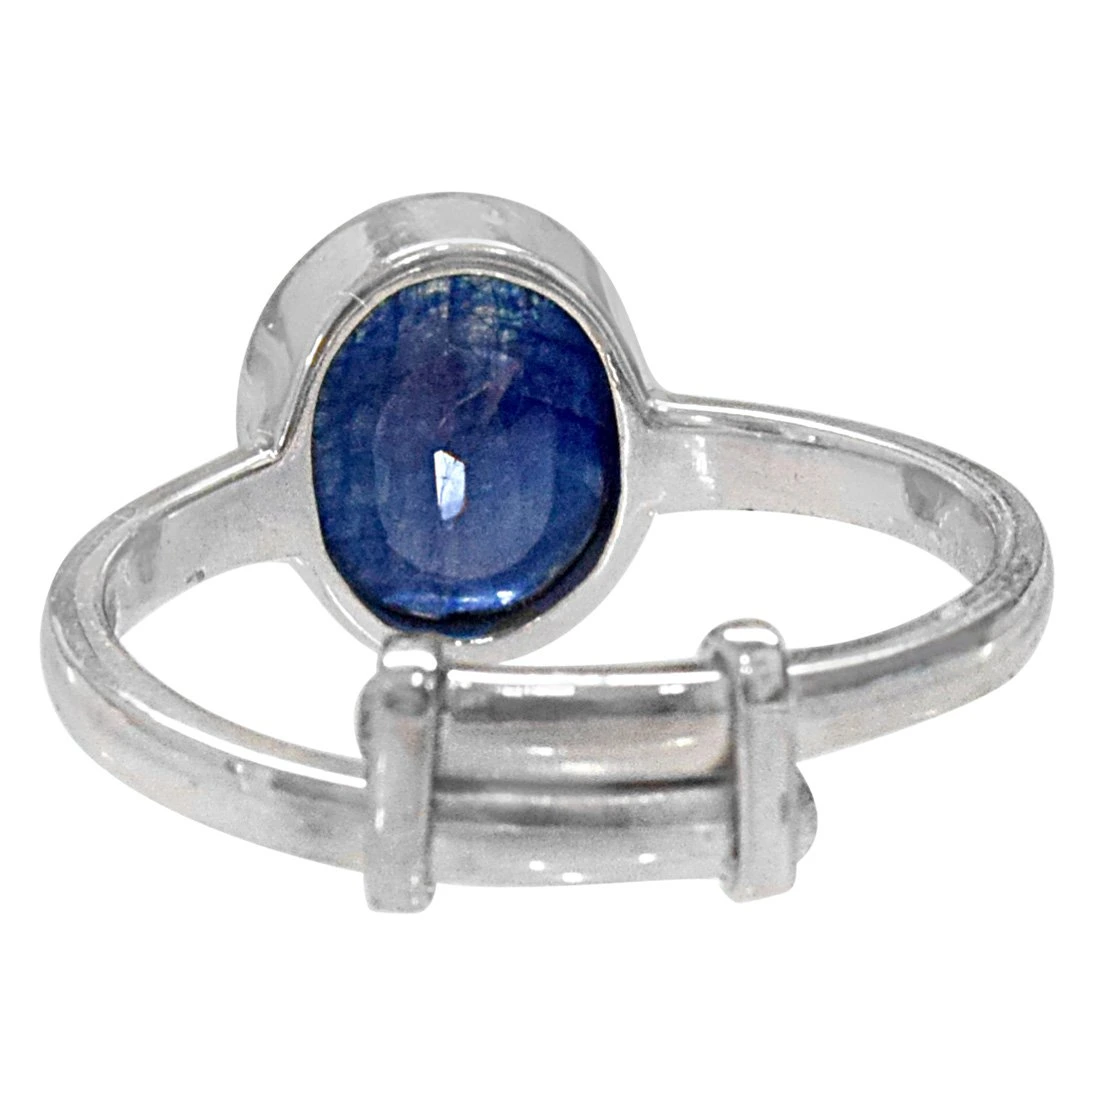 5.69cts Oval Blue Sapphire and 925 Silver Adjustable Ring (GSR63)